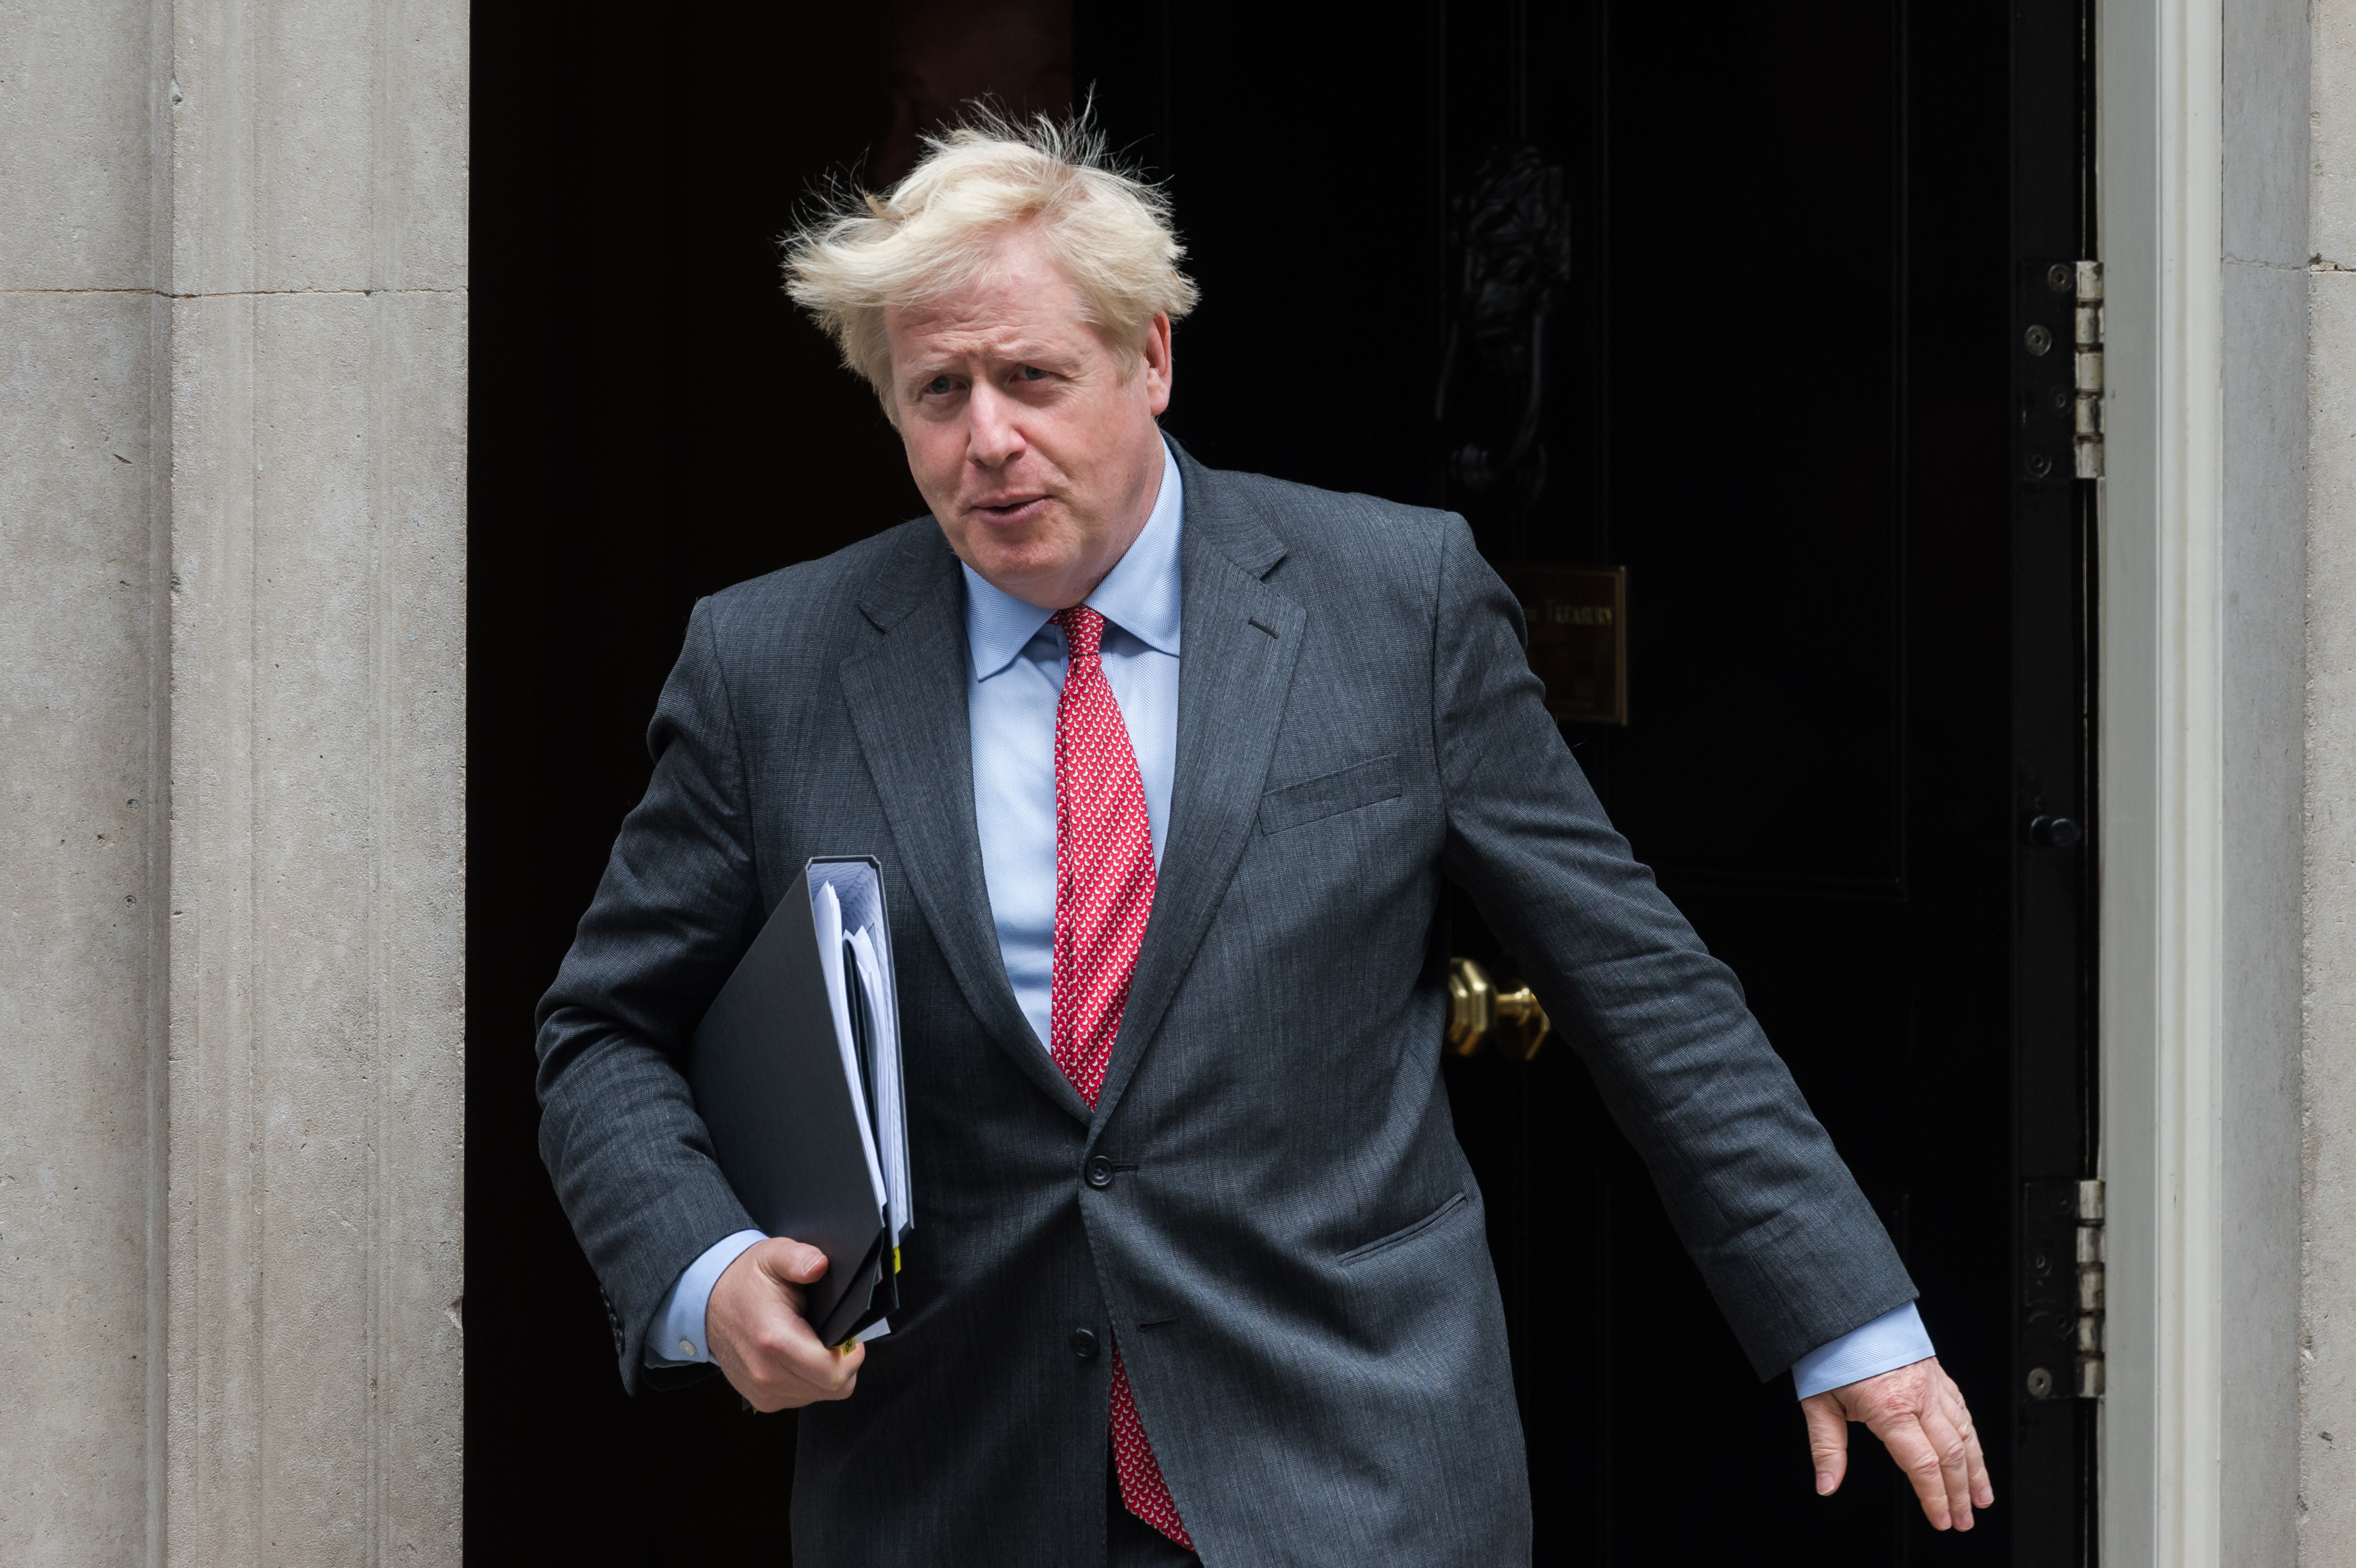 British Prime Minister Boris Johnson leaves 10 Downing Street for the House of Commons to deliver a statement on tightening coronavirus restrictions amid widespread increase in daily infection rates across the U.K., on 22 September, 2020 (NurPhoto via Getty Images&mdash;WIktor Szymanowicz/NurPhoto)